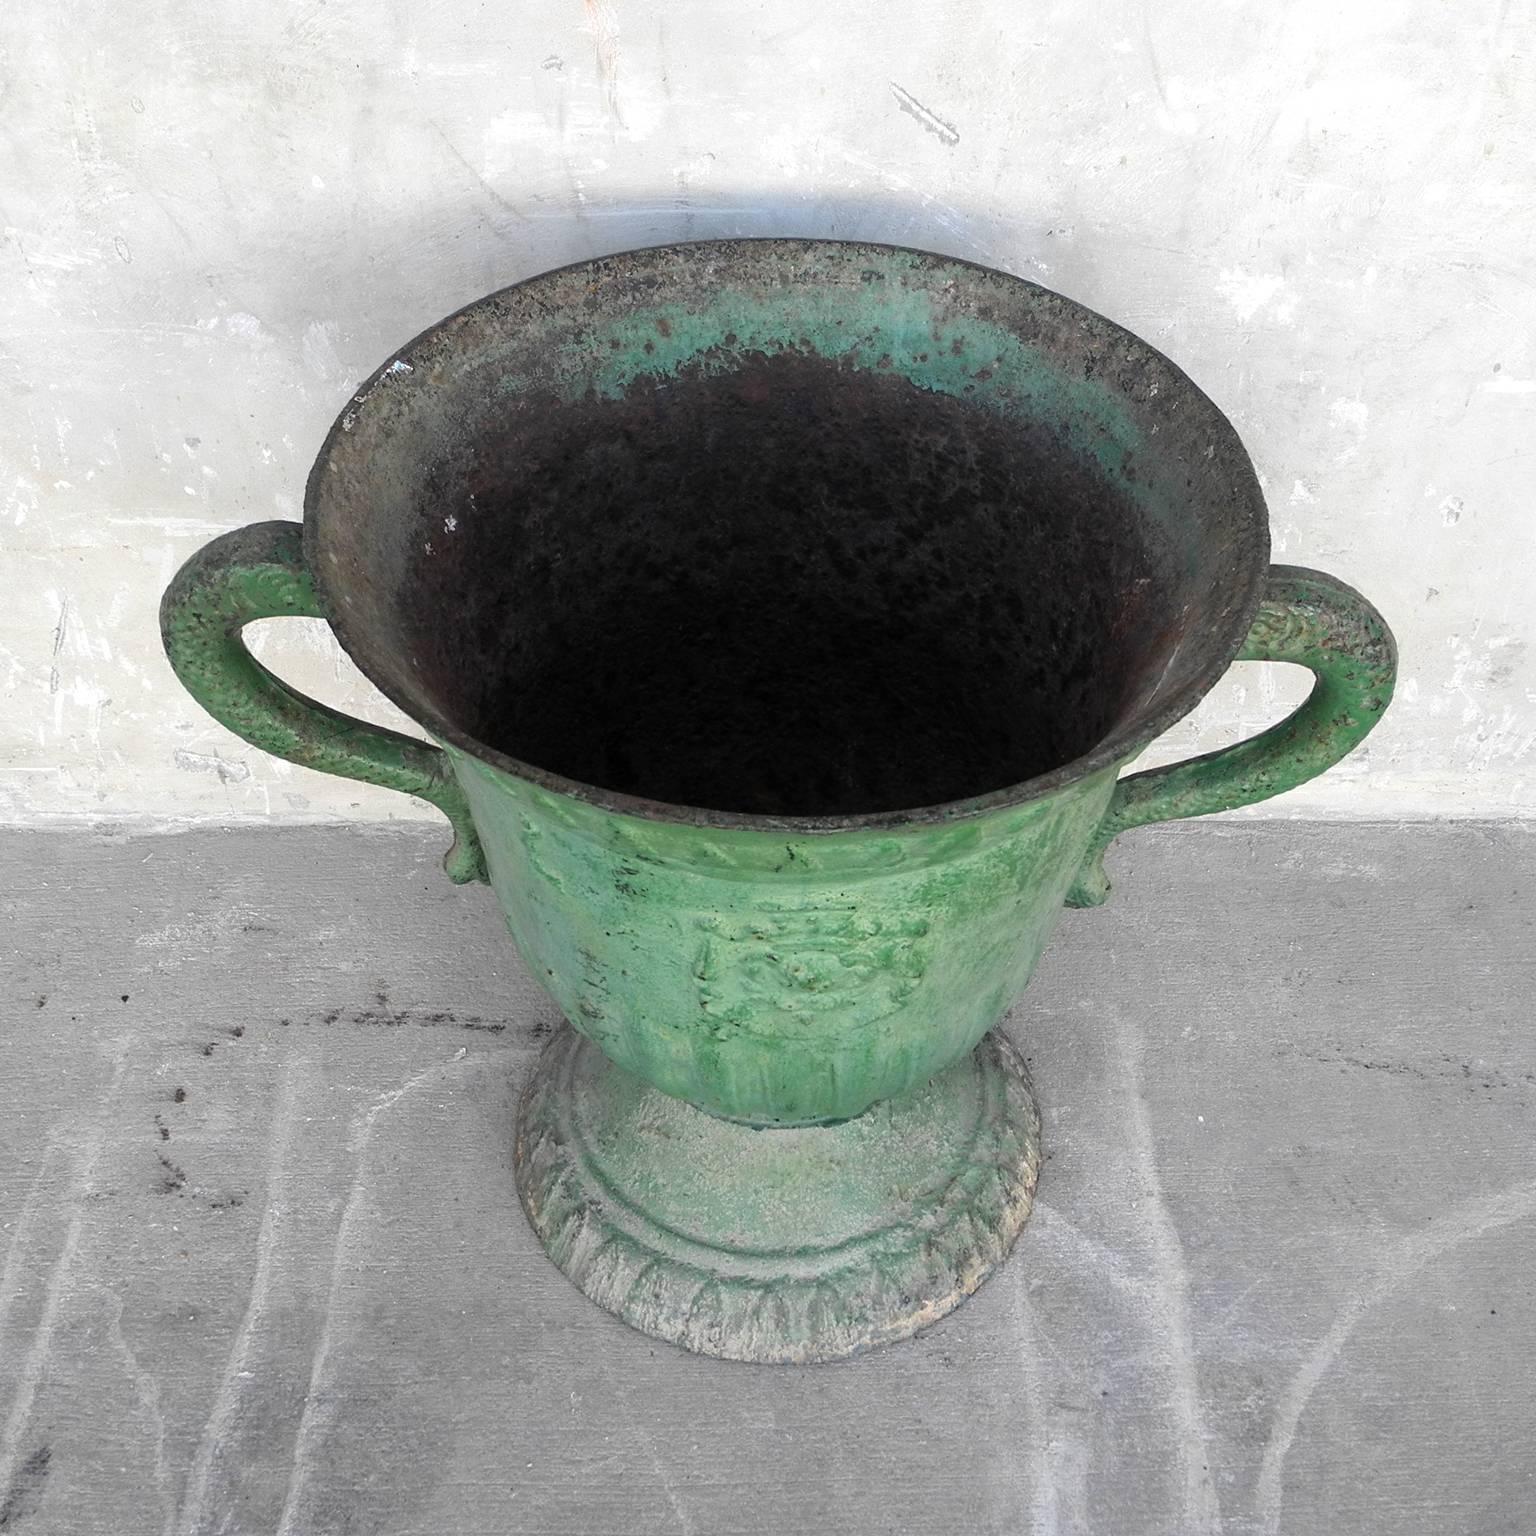 This heavy and grand French jardiniere/planter is made of iron and from the late 17th century. It has a vibrant green color and works perfectly as an entrance piece or a center piece on a table. Fill it with either sturdier shrubs or lots of